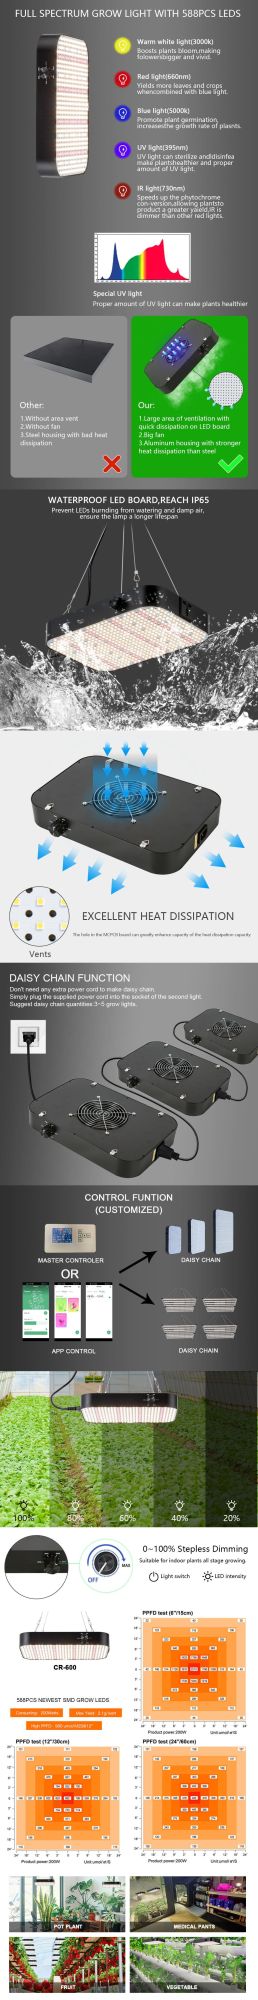 Full Spectrum Plant Grow Lights, 130W Dimmable LED Grow Light with 2X2FT Lighting Area Plant Grow Light for Indoor Plants Seed Starting Vegetable